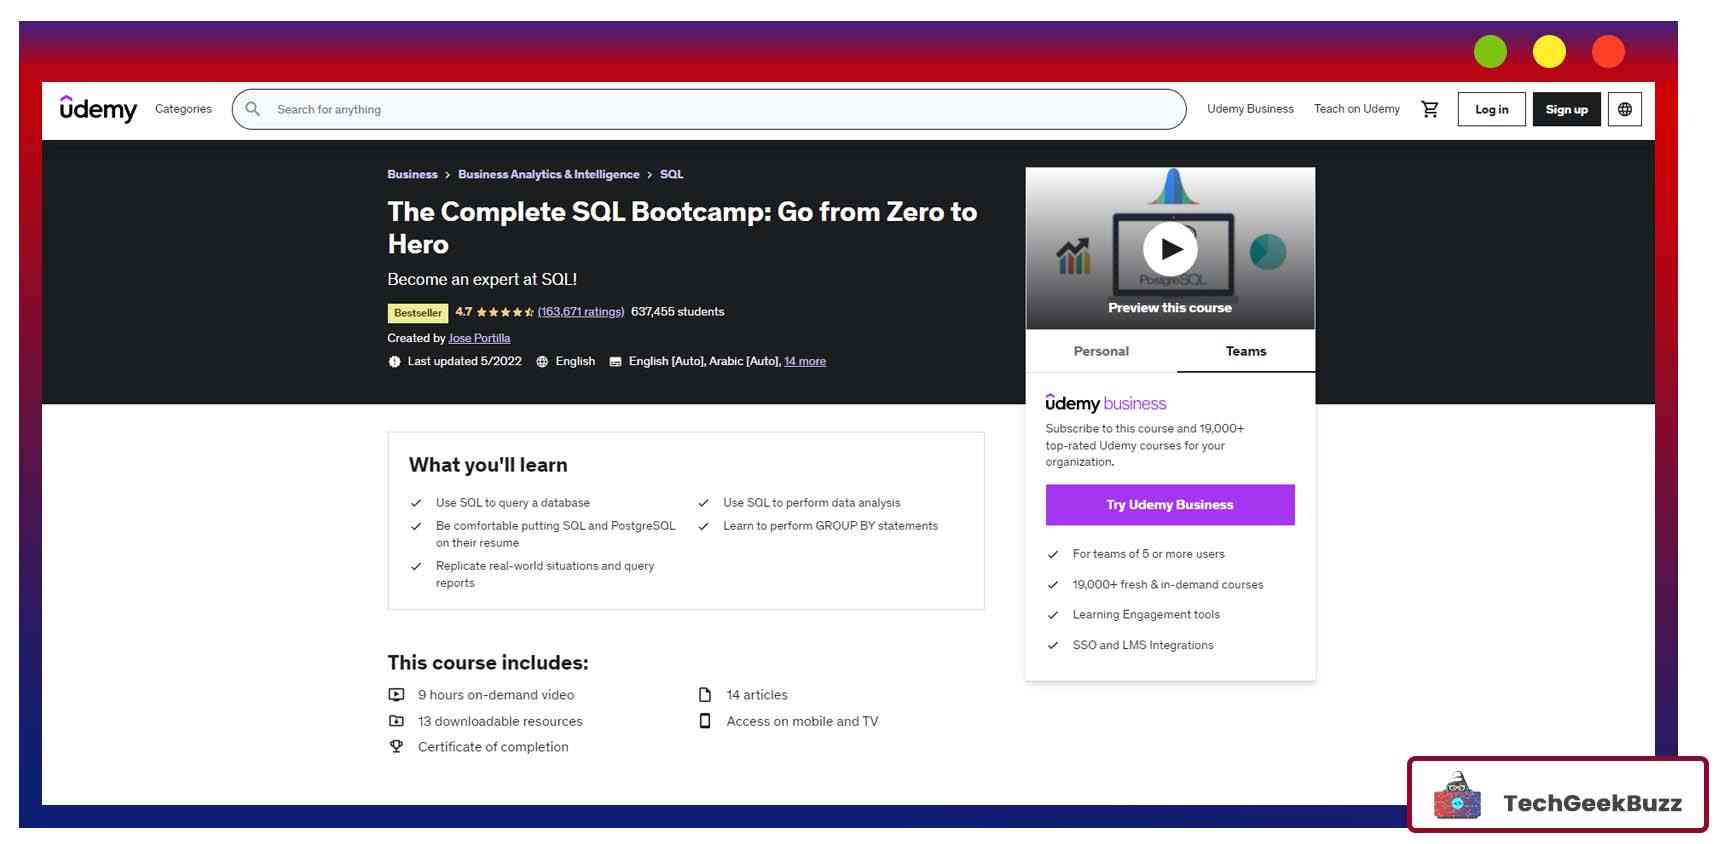 The Complete SQL Bootcamp 2022: Go from Zero to Hero